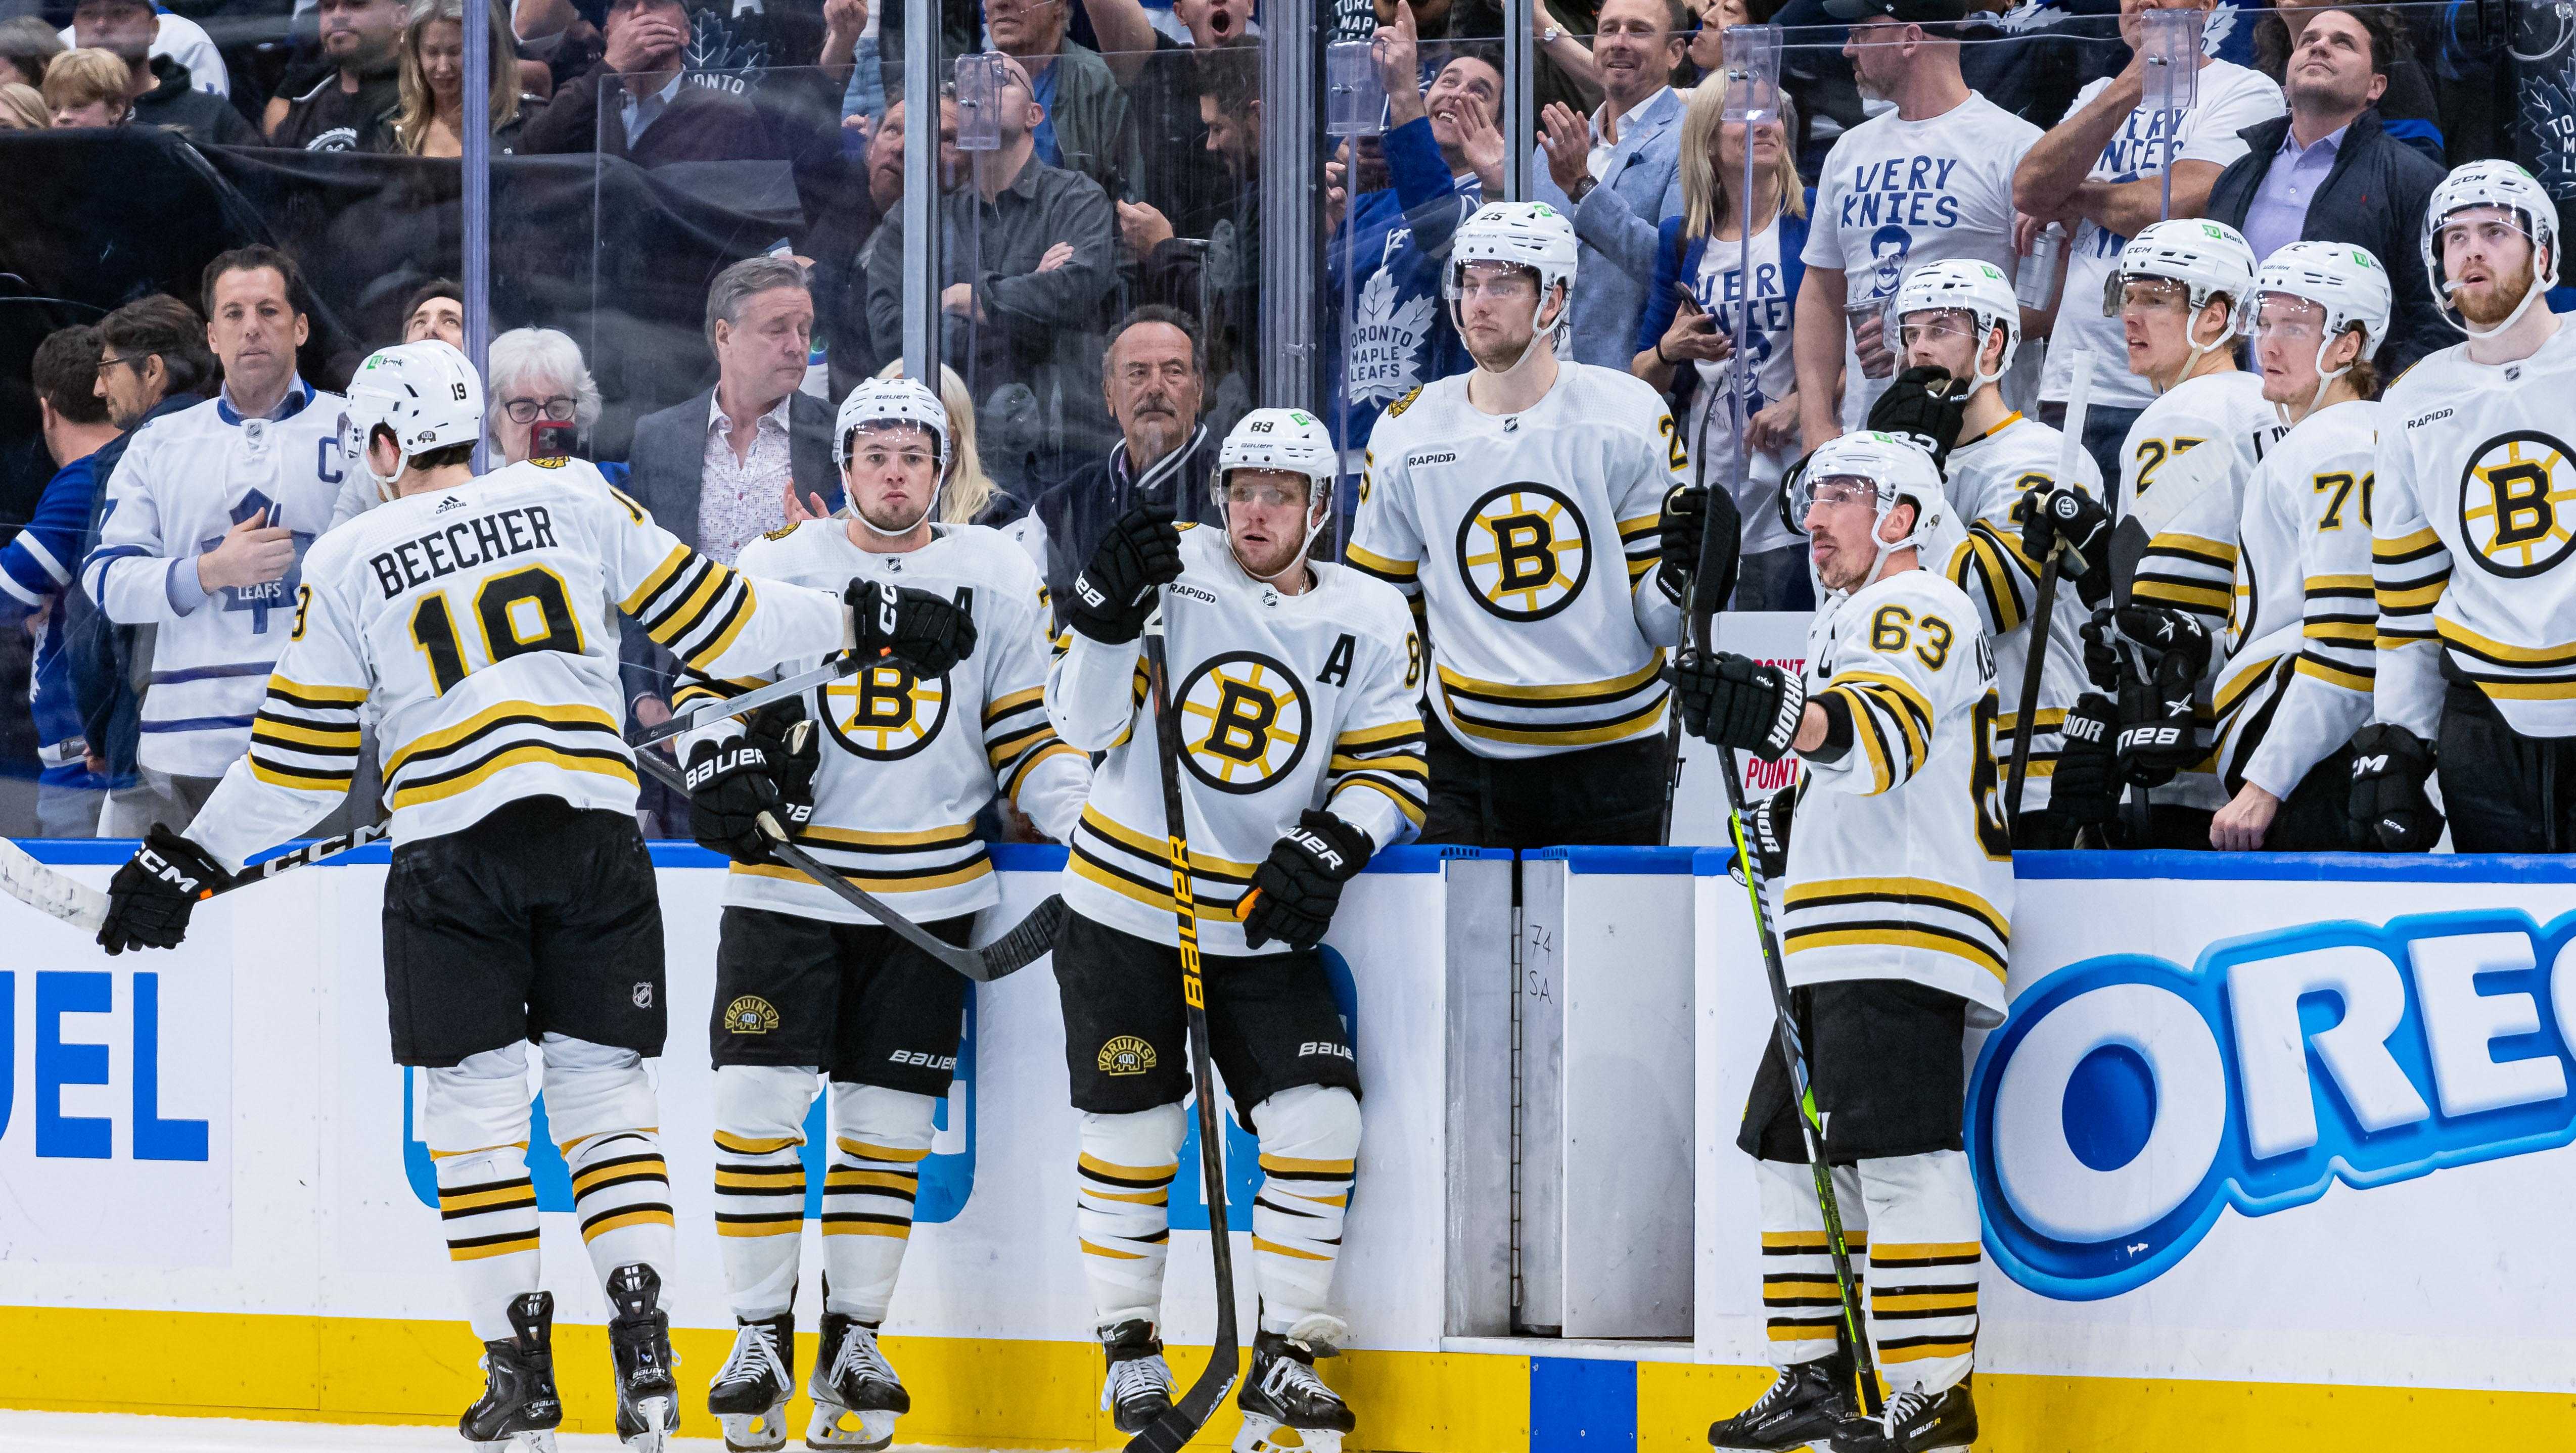 Bruins fans hoping for a miracle in Game 7, Josh Brogadir says